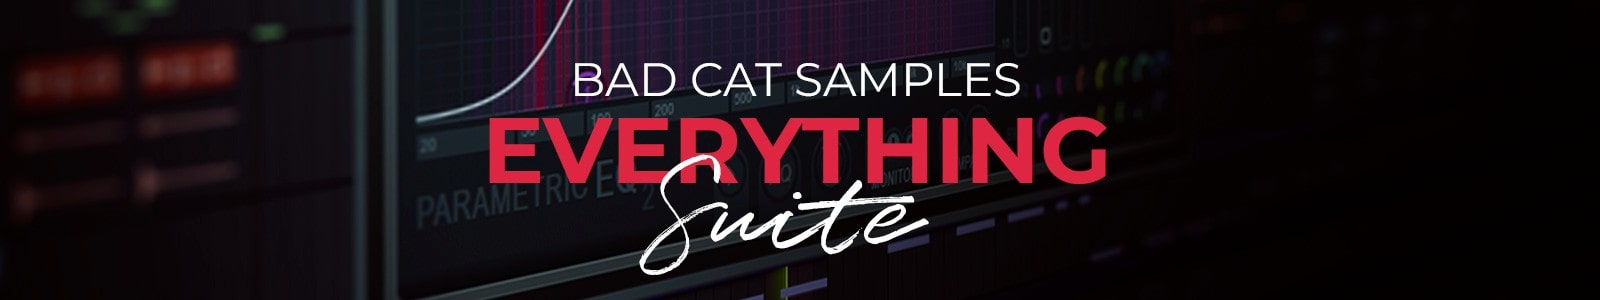 Everything Suite by Bad Cat Samples